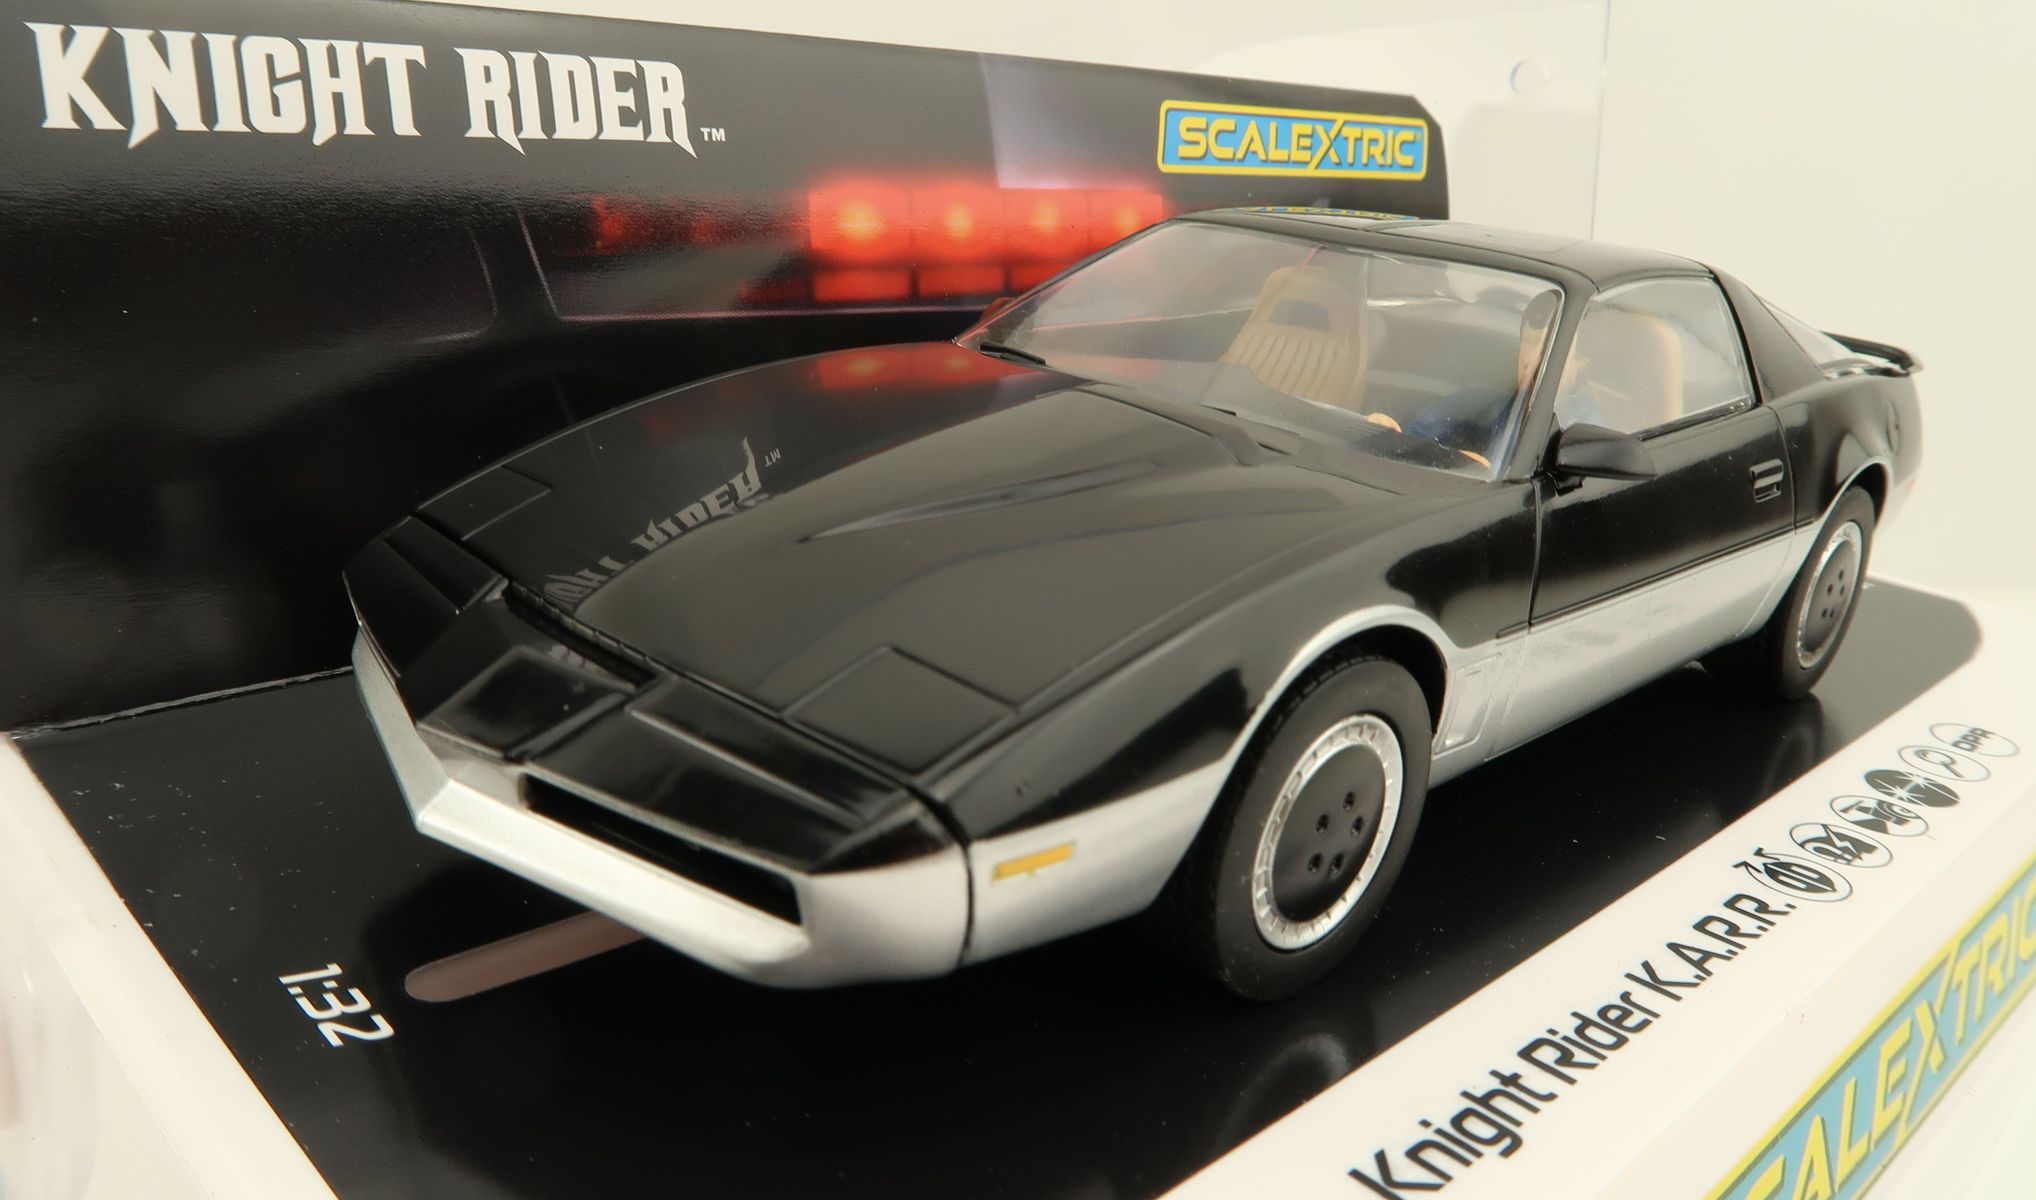 Product Image - Scalextric C4296 1965 Knight Rider K.A.R.R Slot Car 1:32 Scale